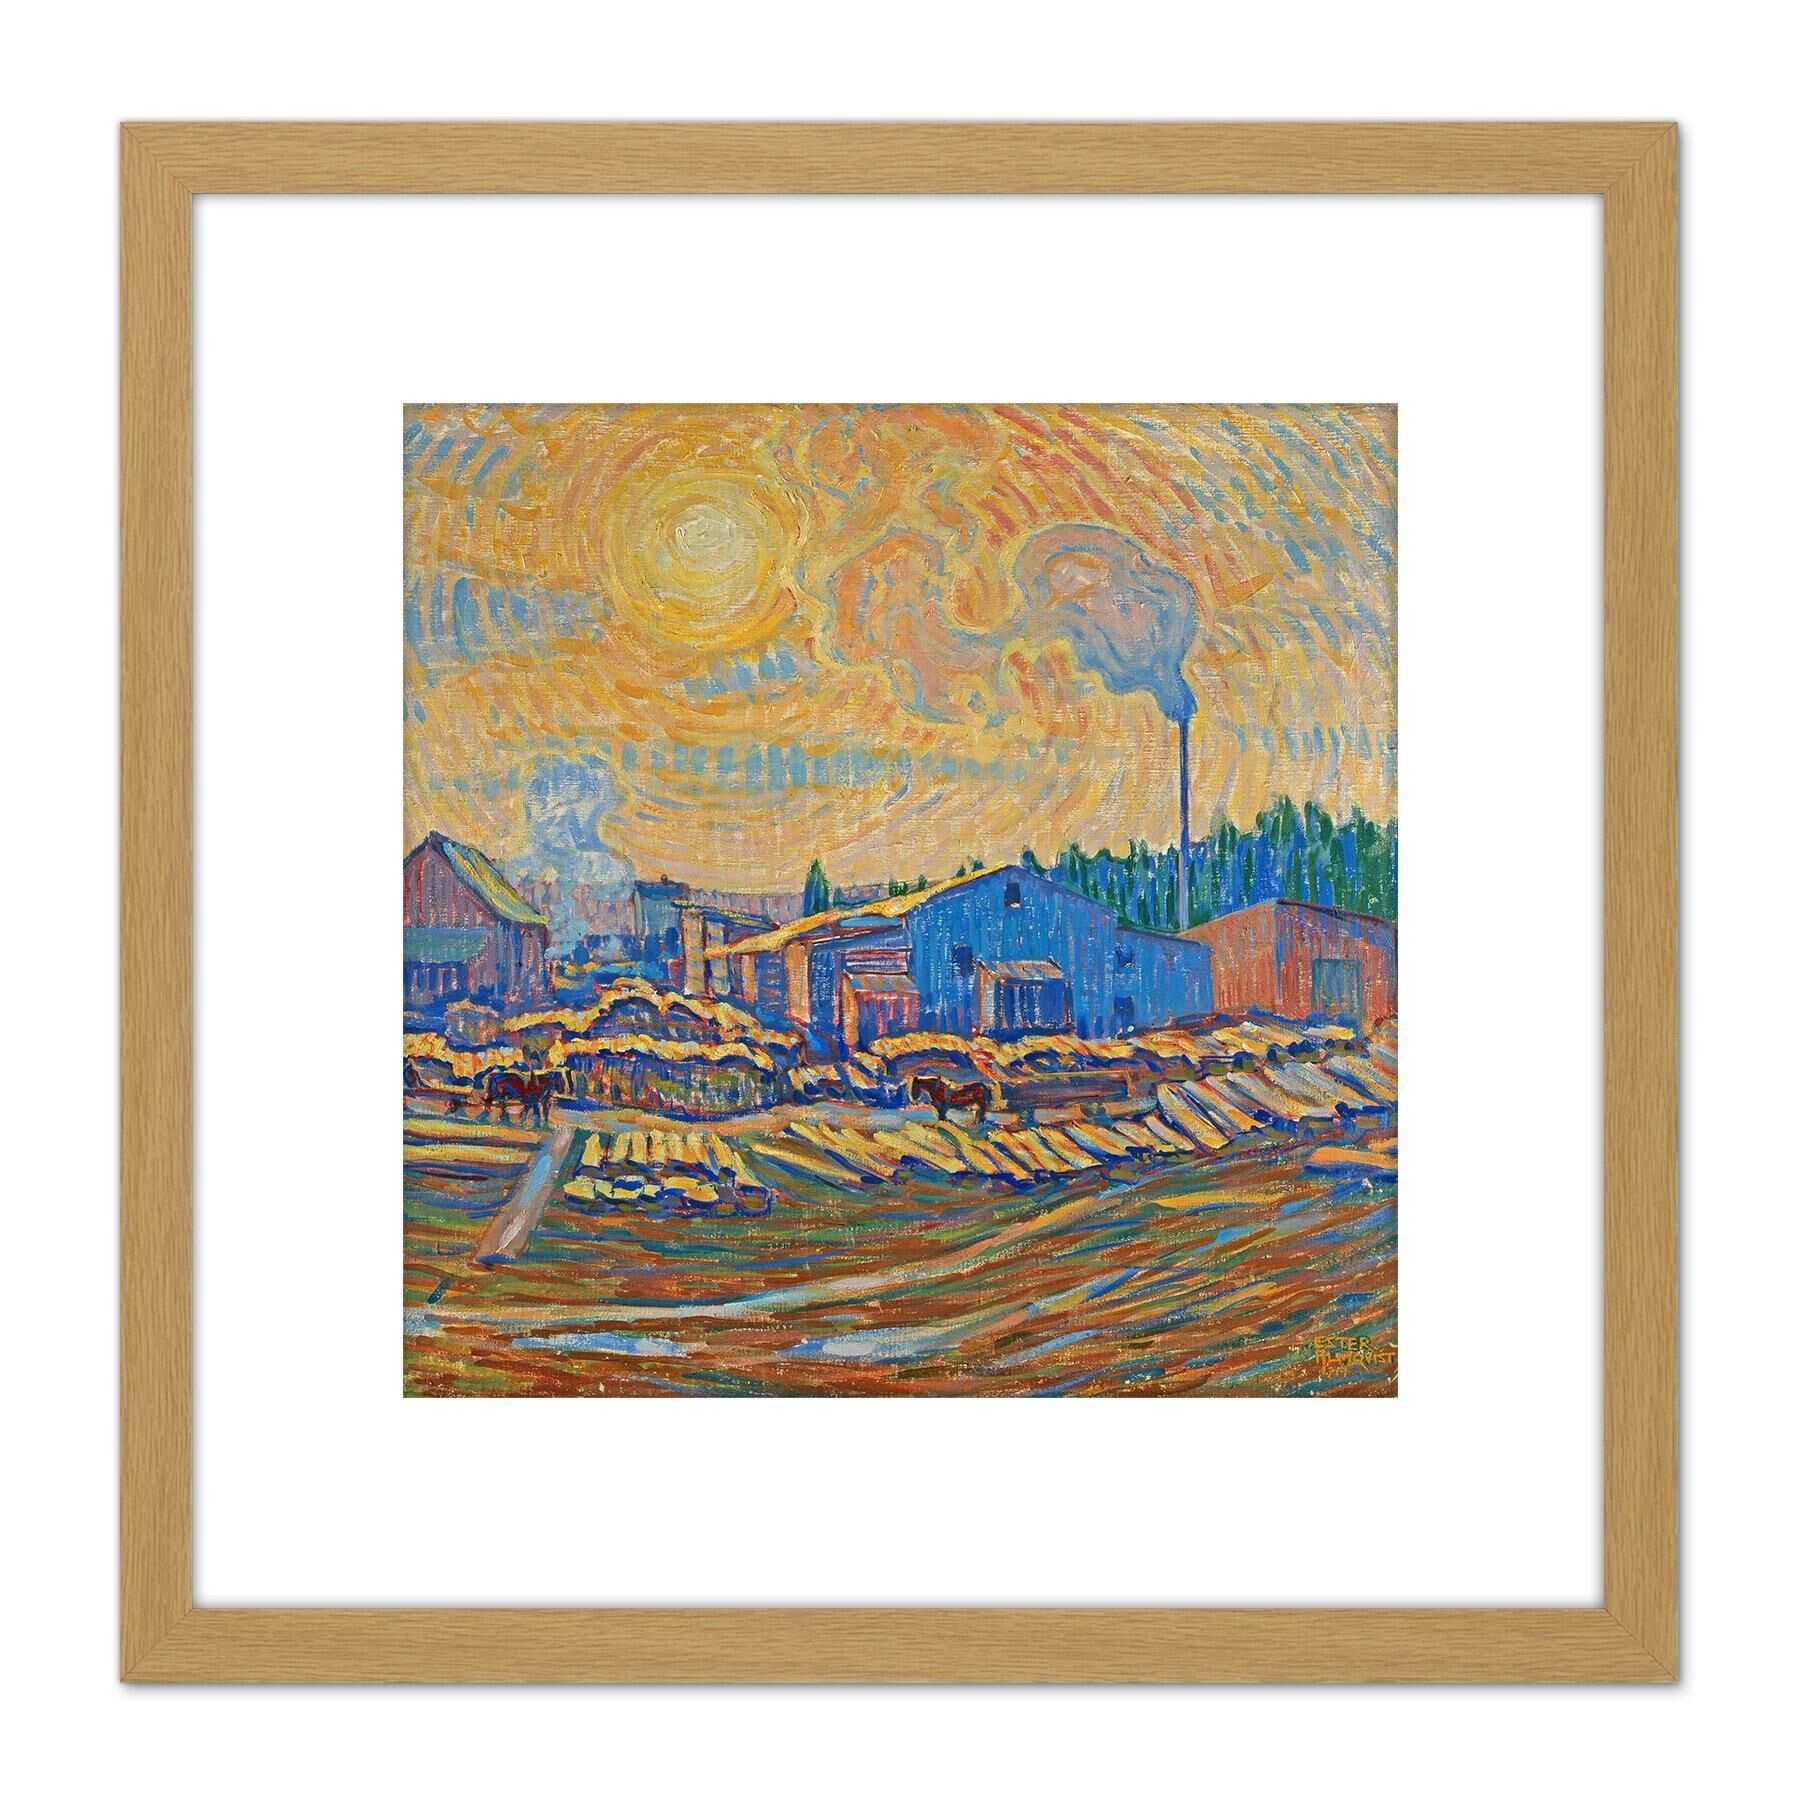 Artery8 Ester Almqvist The Sawmill December Sun 8X8 Inch Square Wooden Framed Wall Art Print Picture with Mount